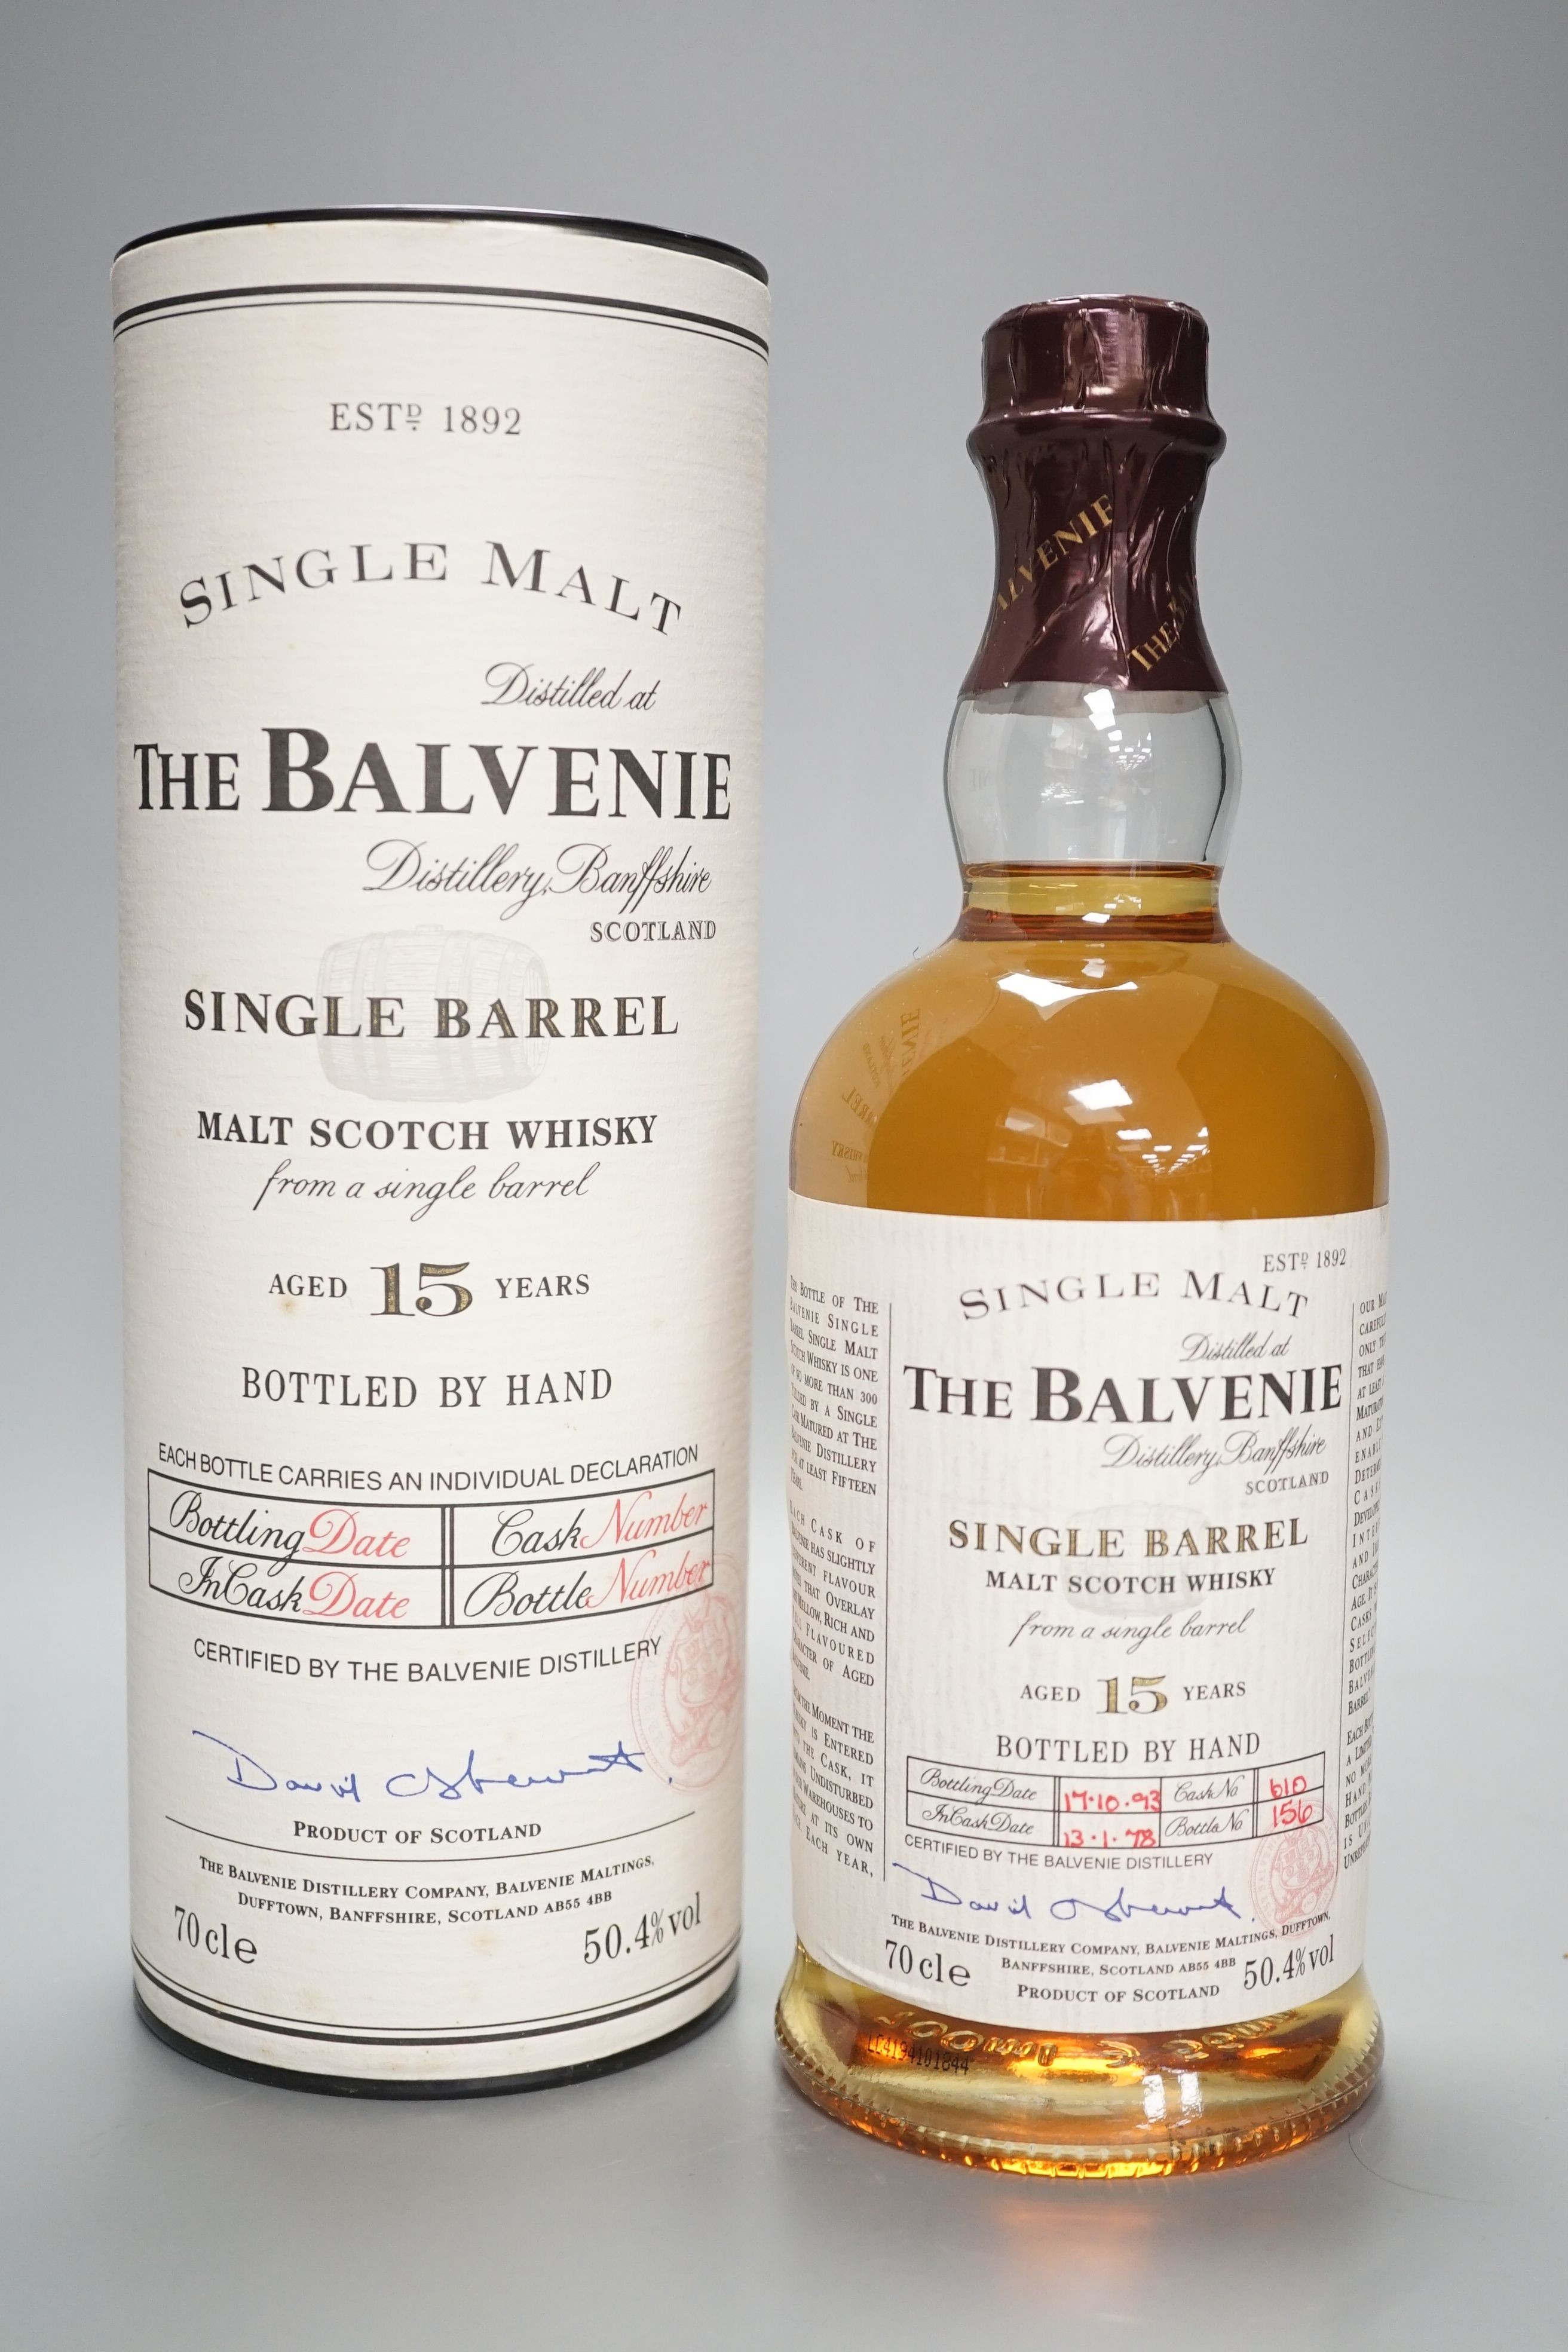 The Balvenie, a single boxed bottle of whisky, aged 15 years, bottle date 17.10.93, cask no. 610, in cask date 13.1.78, bottle no. 156